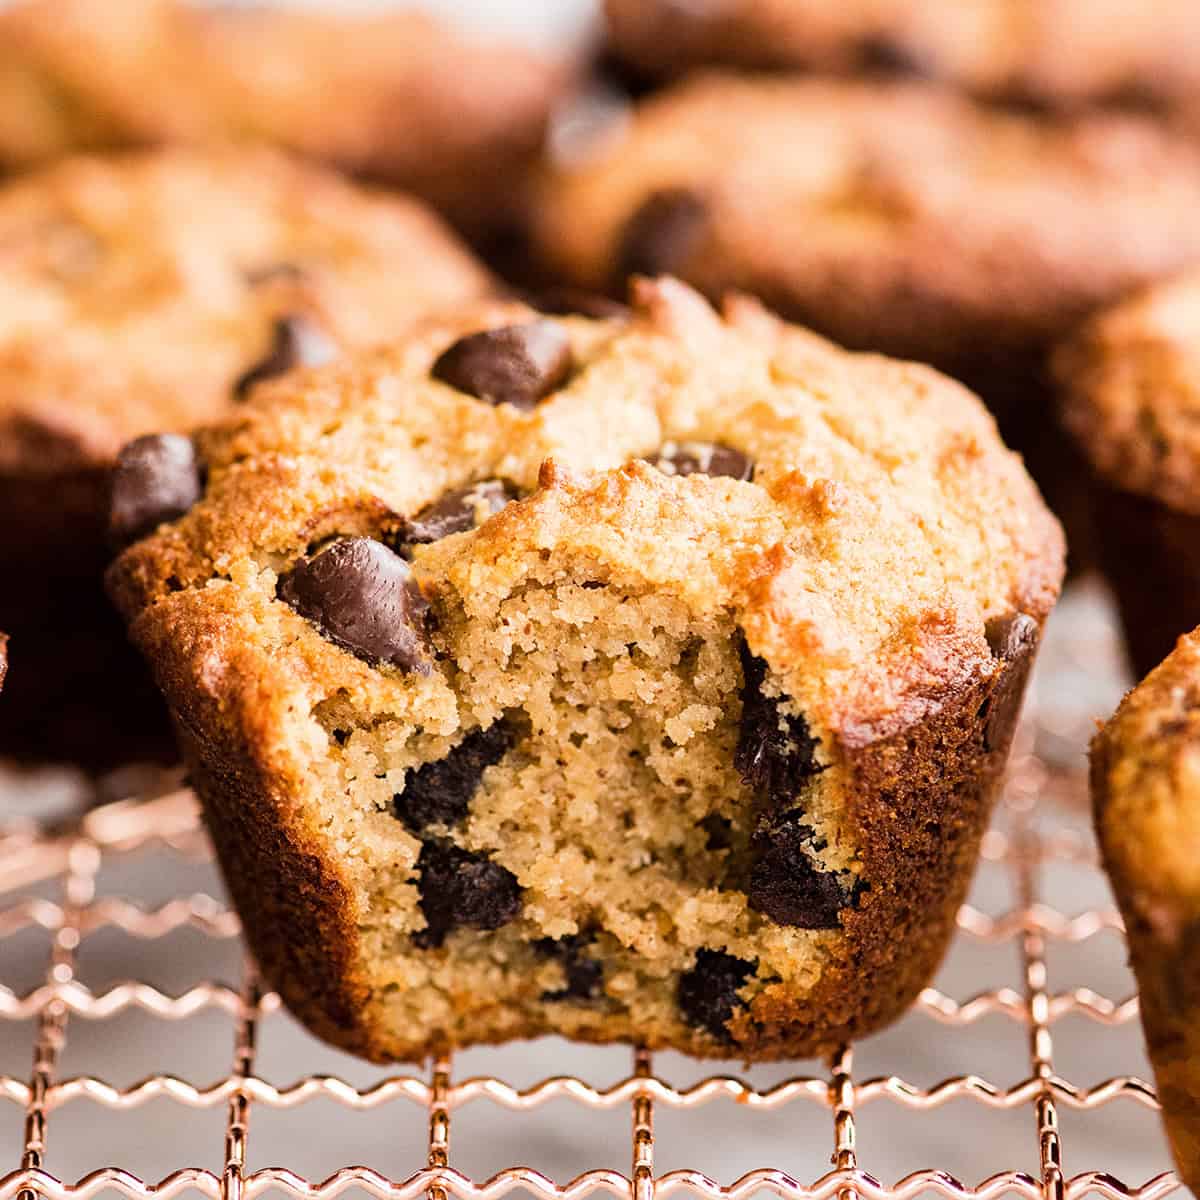 a Gluten Free Chocolate Chip Muffin with a bite taken out of it